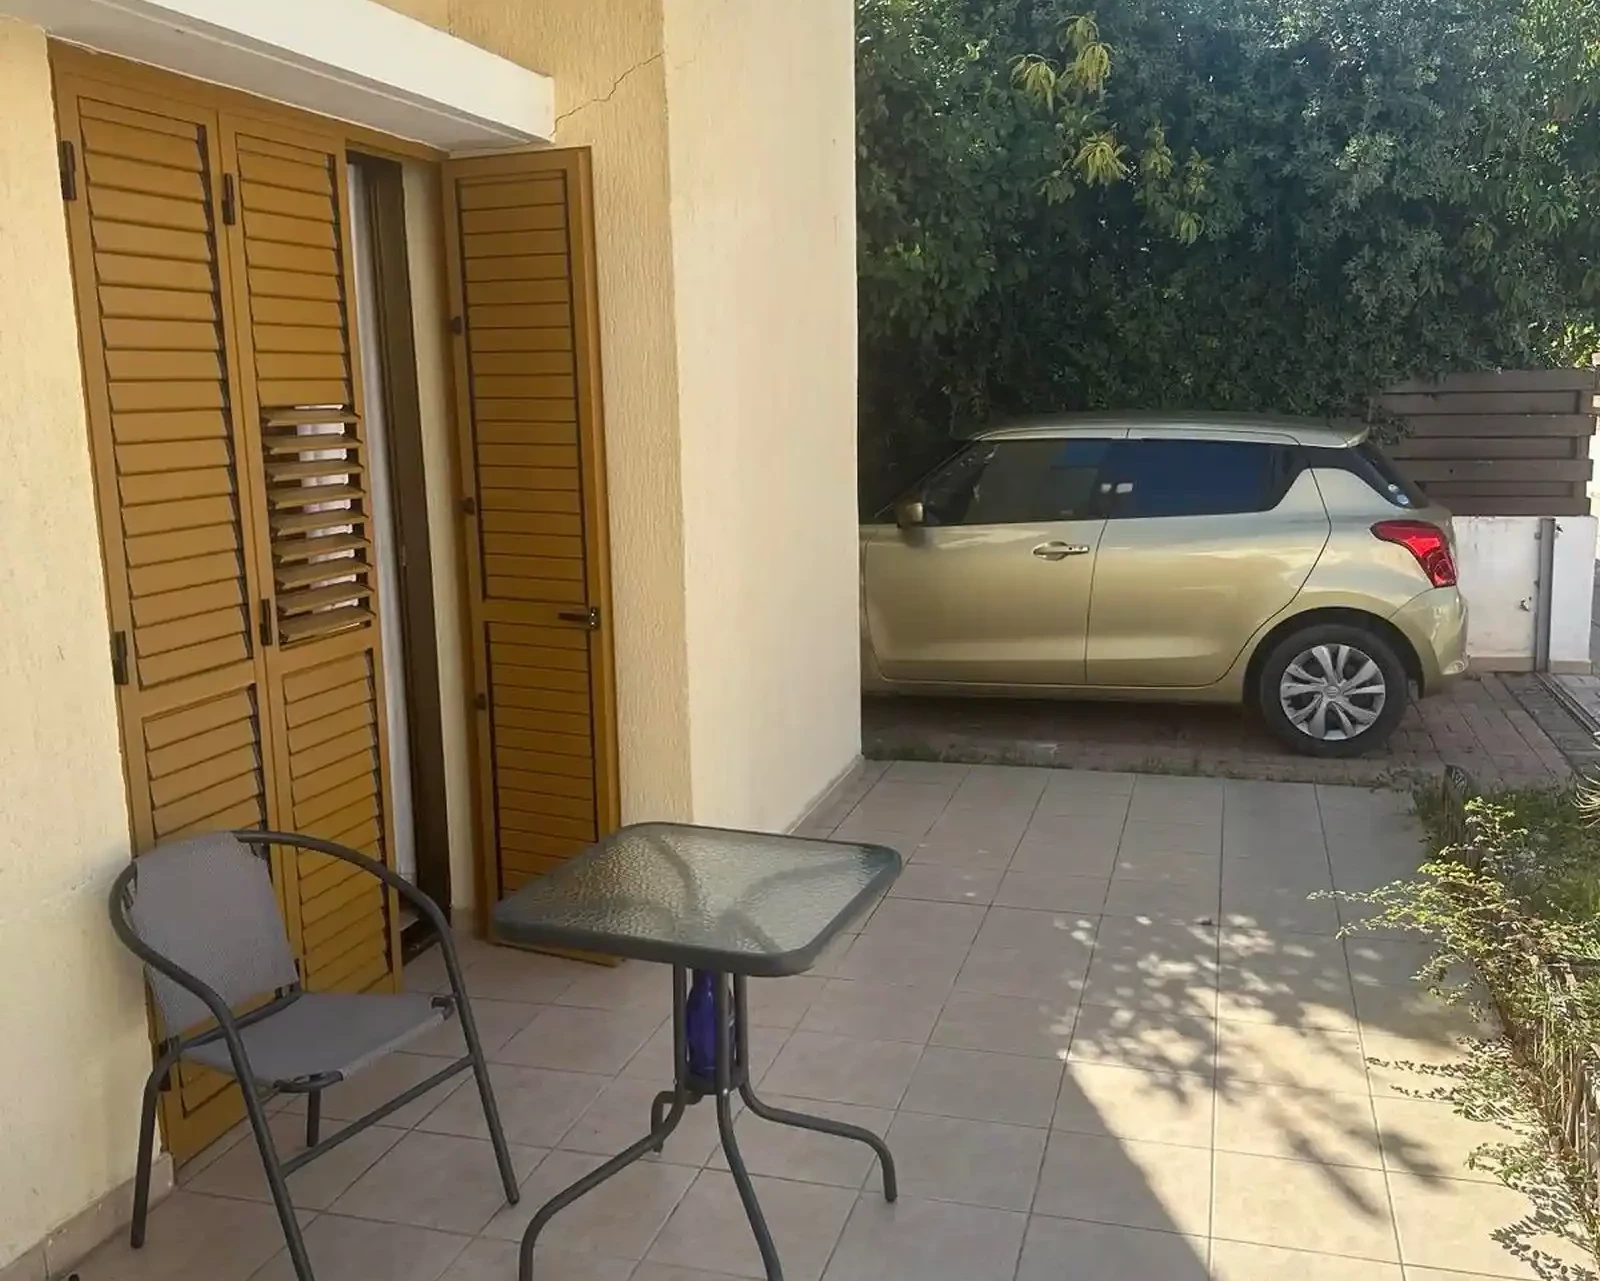 2-bedroom apartment fоr sаle €227.000, image 1